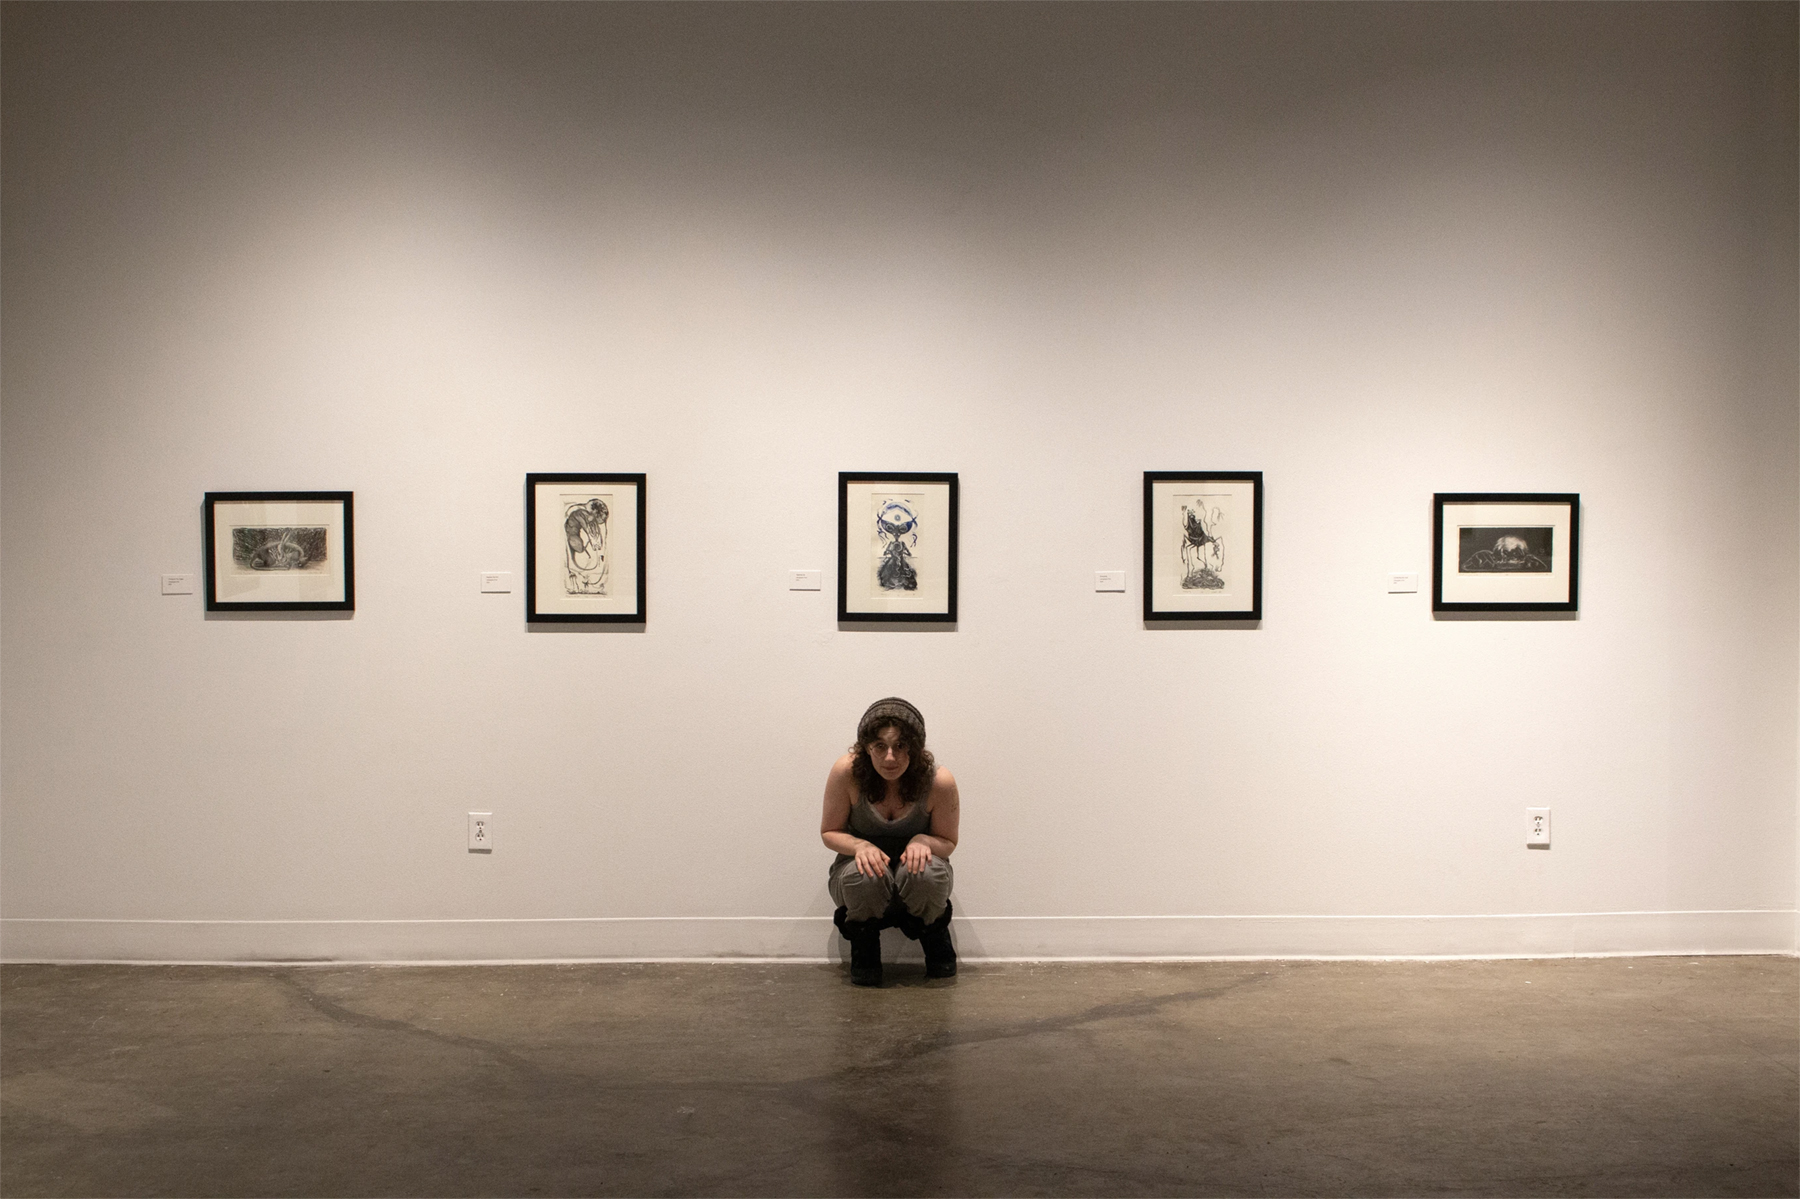 Chana Stern poses under a series of lithographs at the reception for "Pilgrimage of the Revenant", courtesy of the artist